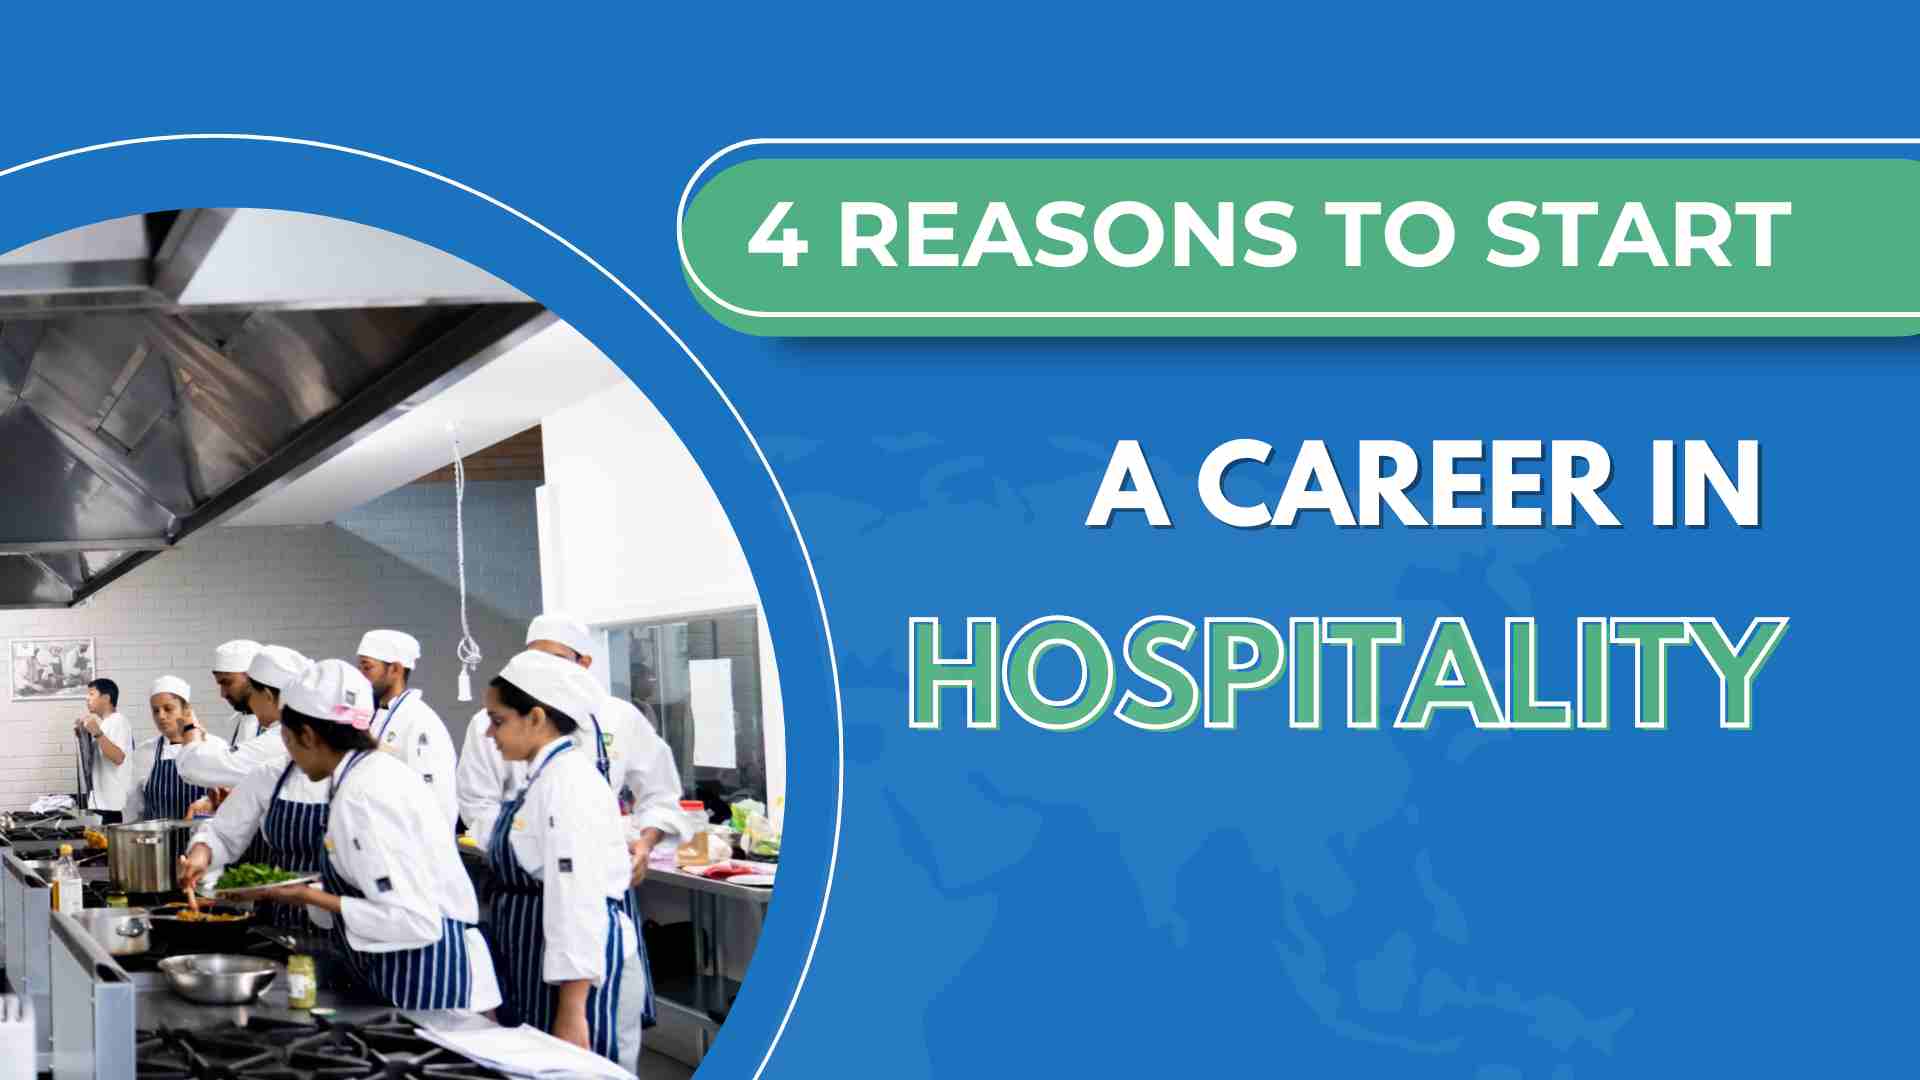 4 Reasons to Start a Career in Hospitality